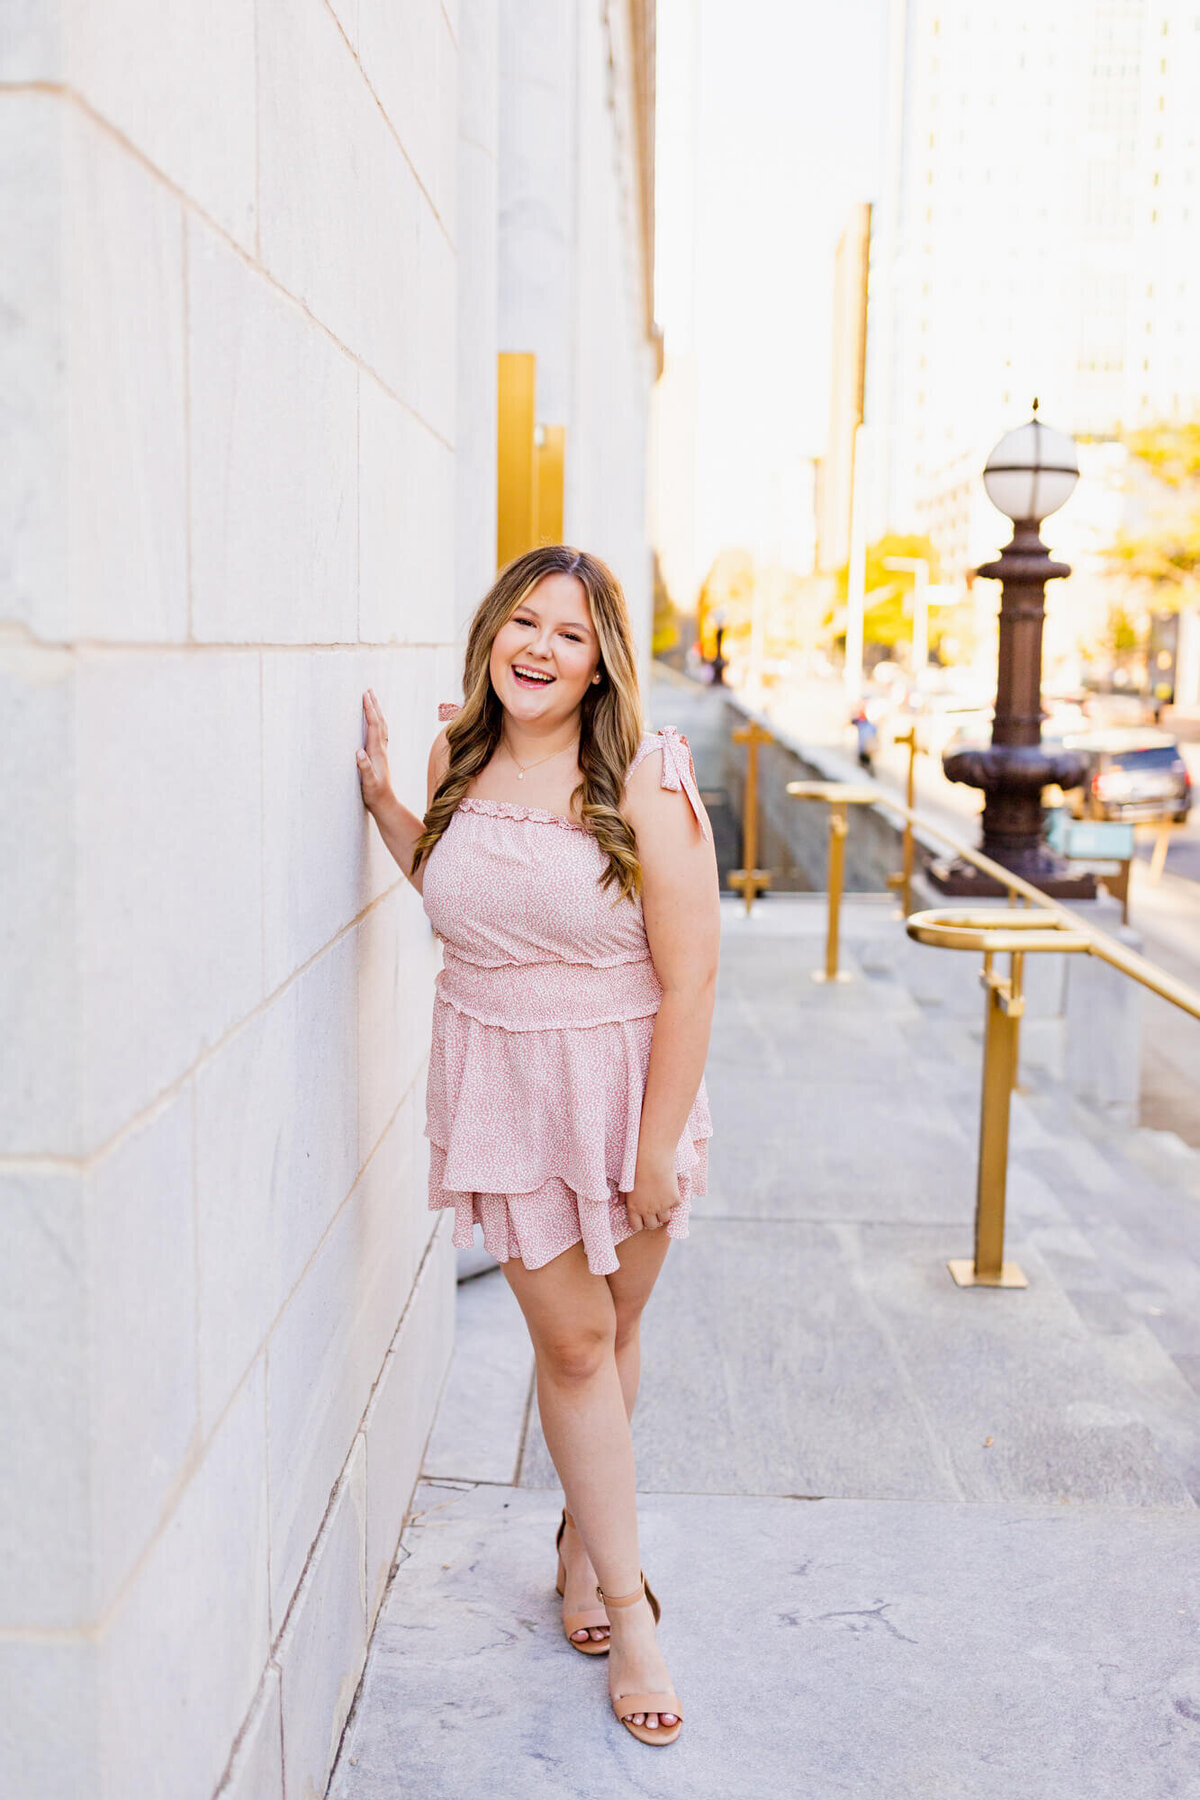 Senior Girl downtown in a light pink dress laughing